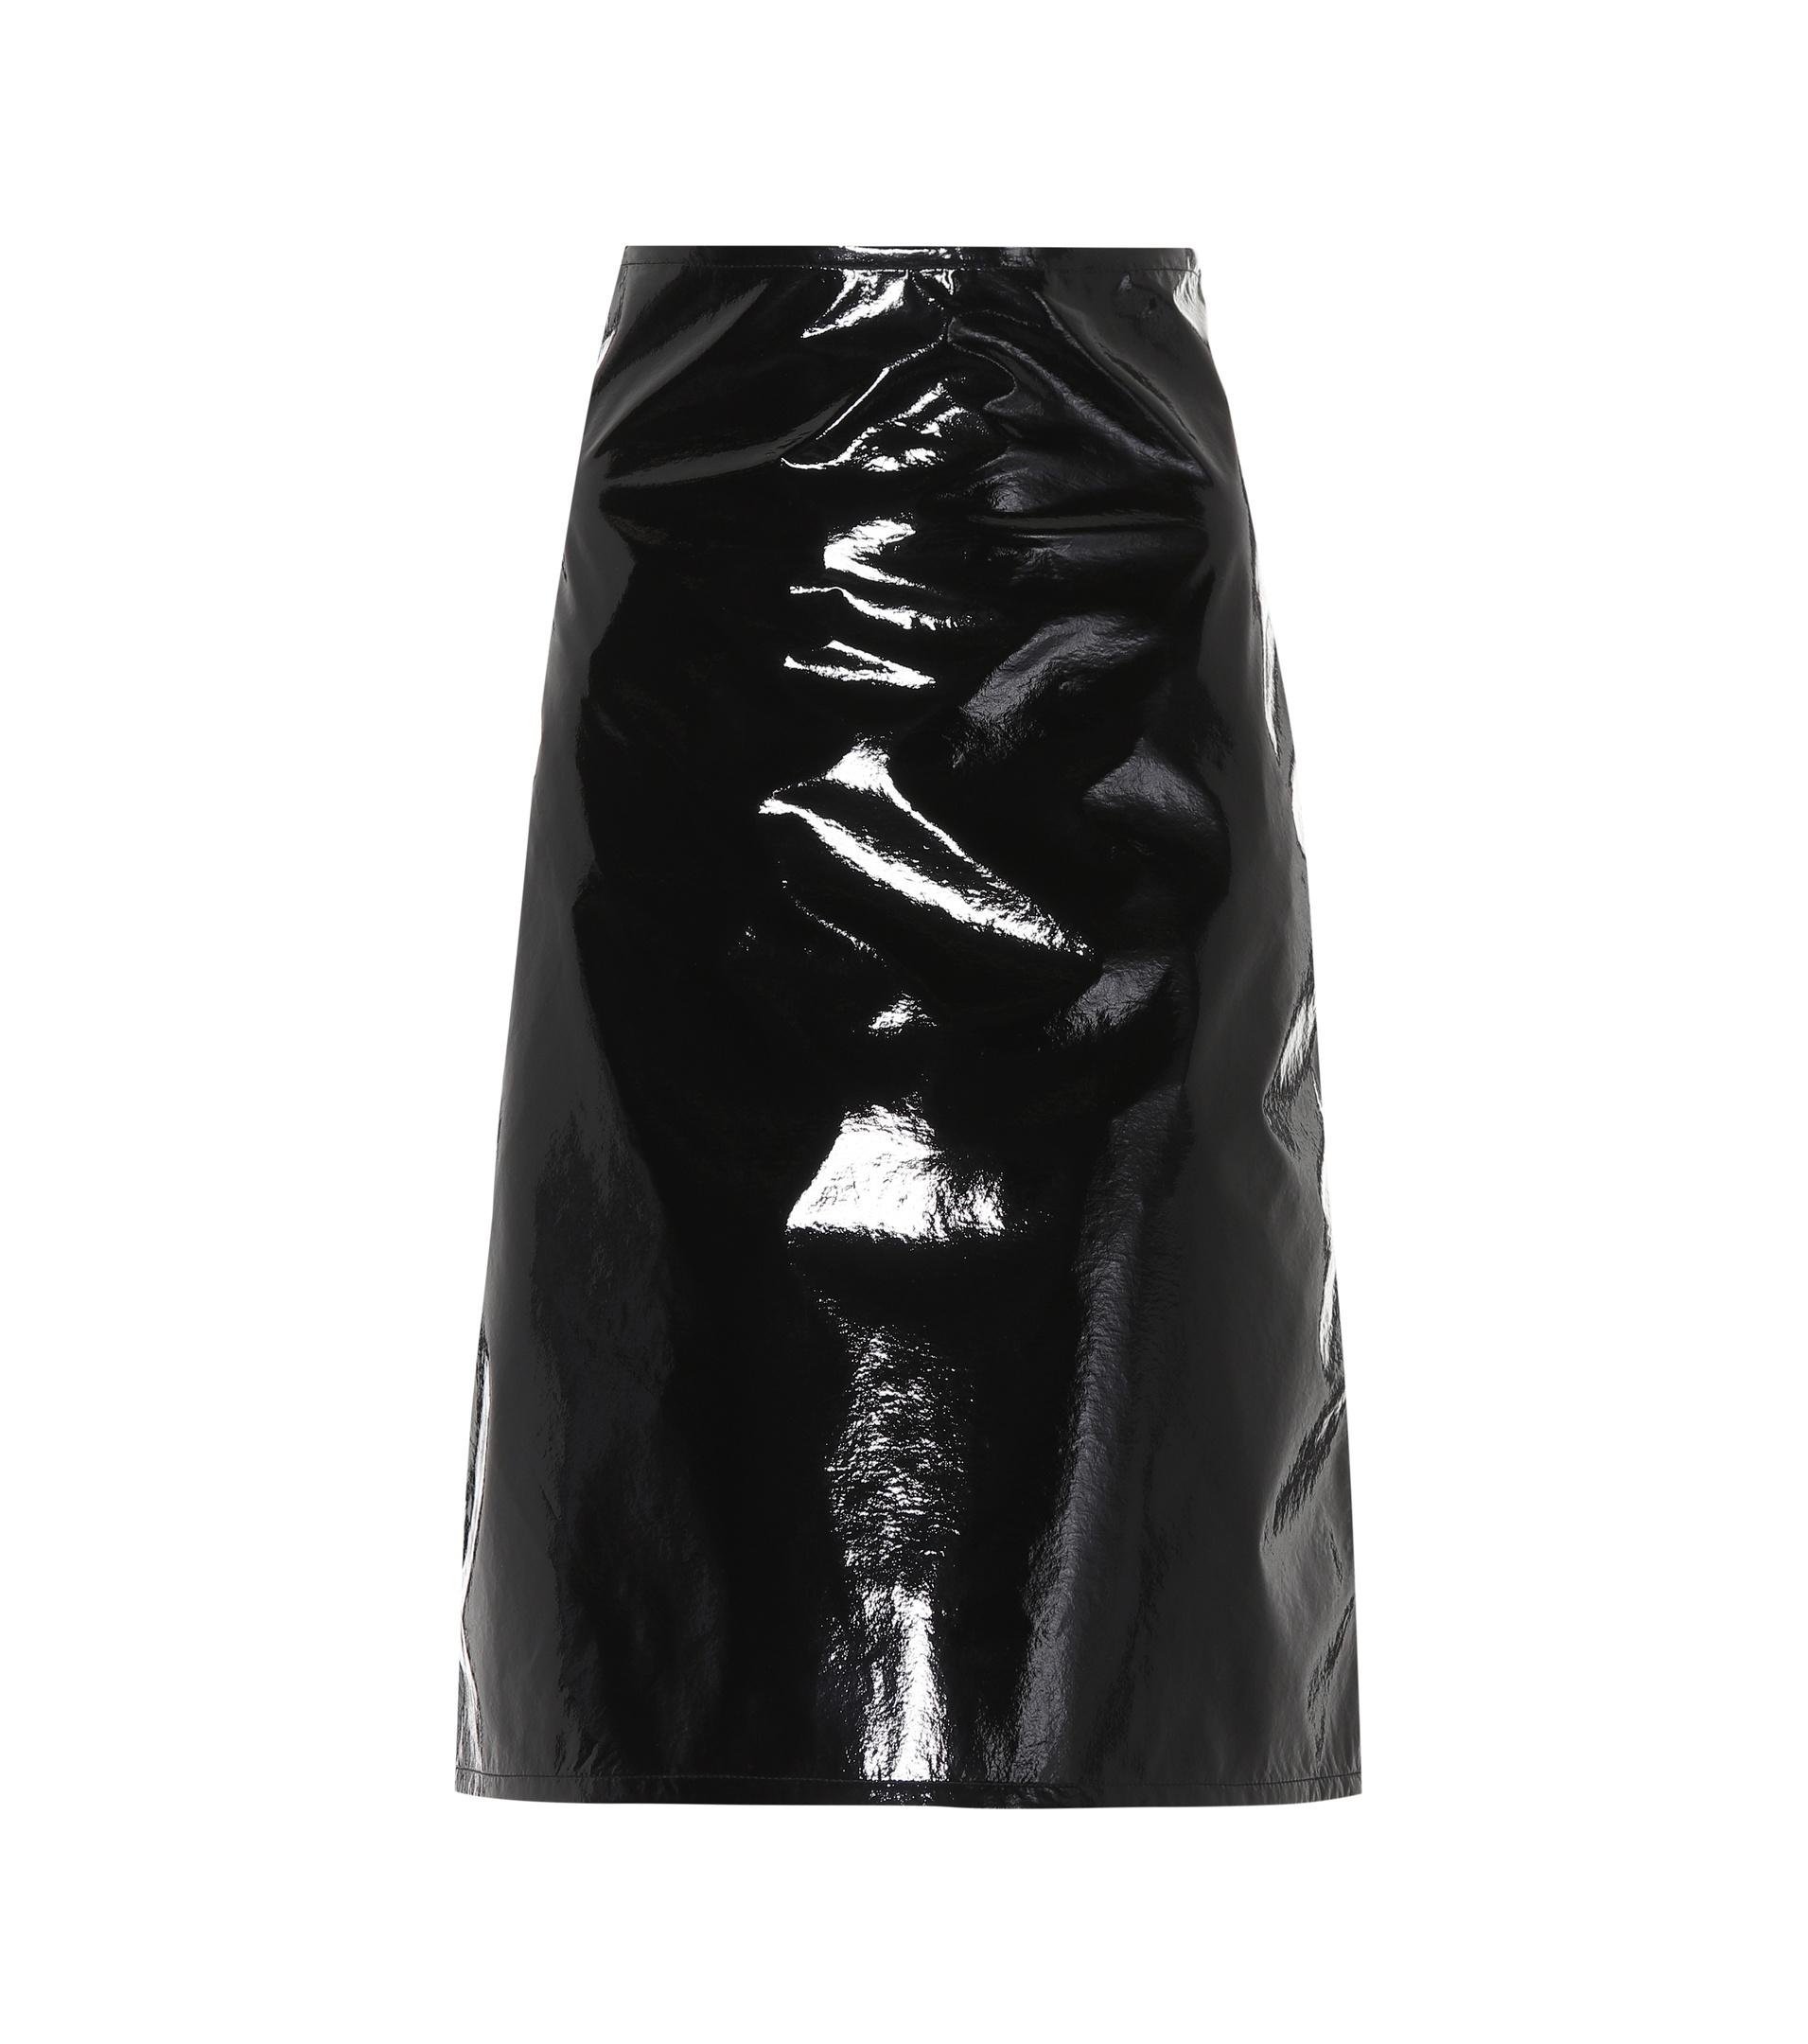 Helmut Lang Faux Leather Skirt in Black - Lyst